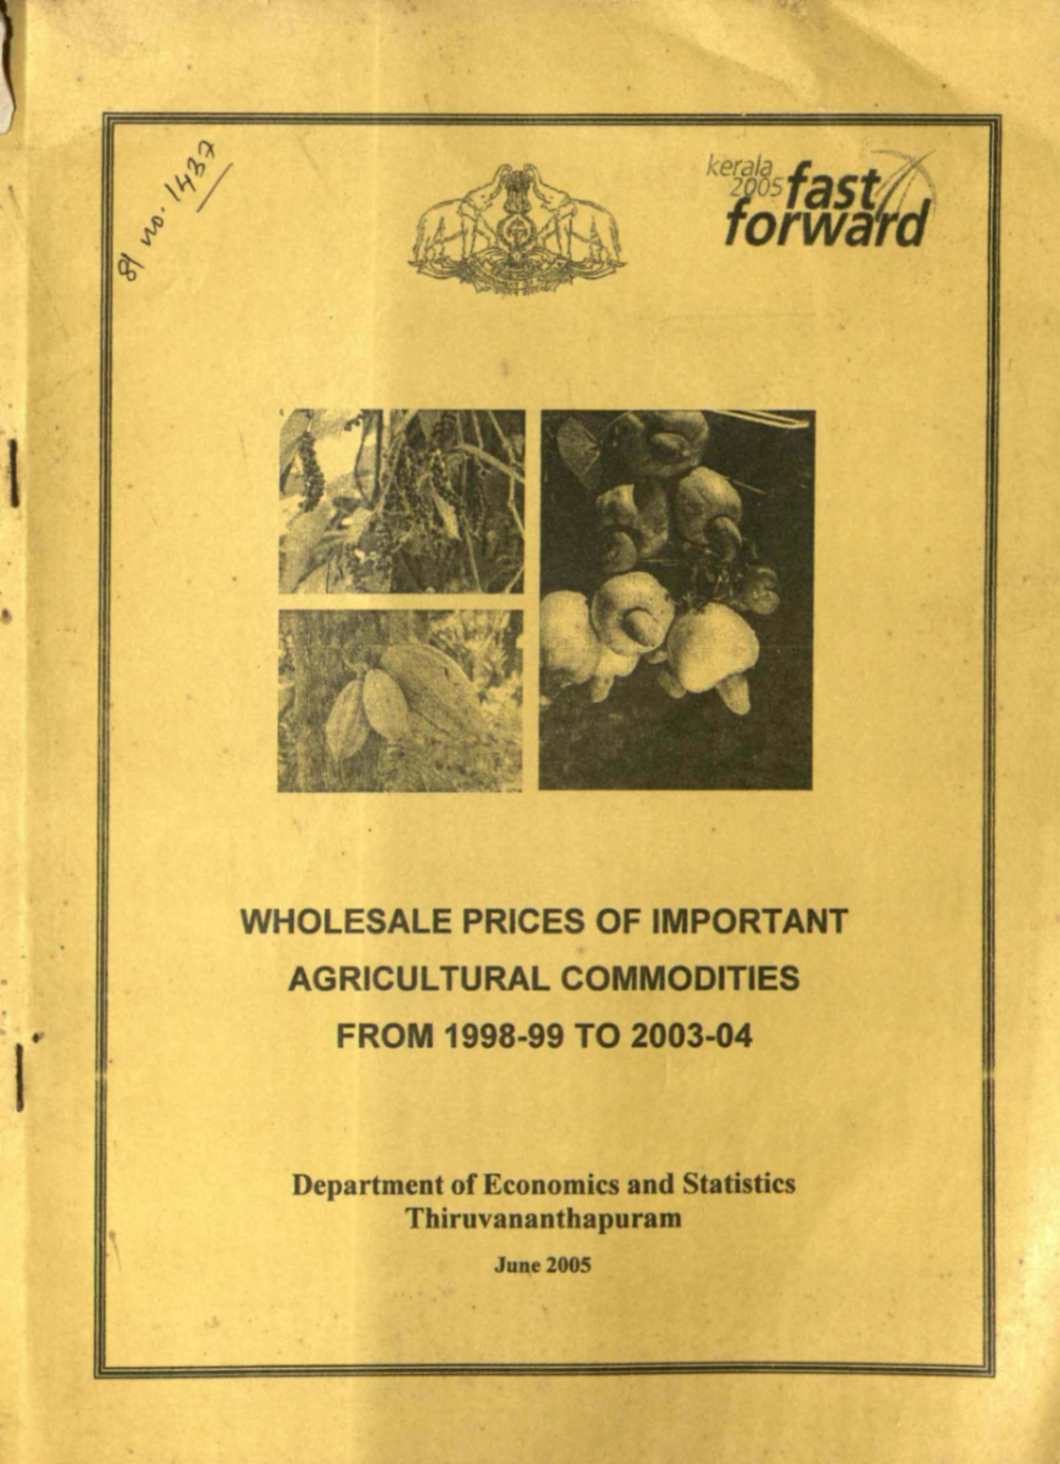 Wholesale Prices Of Important Agricultural Commodities From 1998-99 To 2003-04